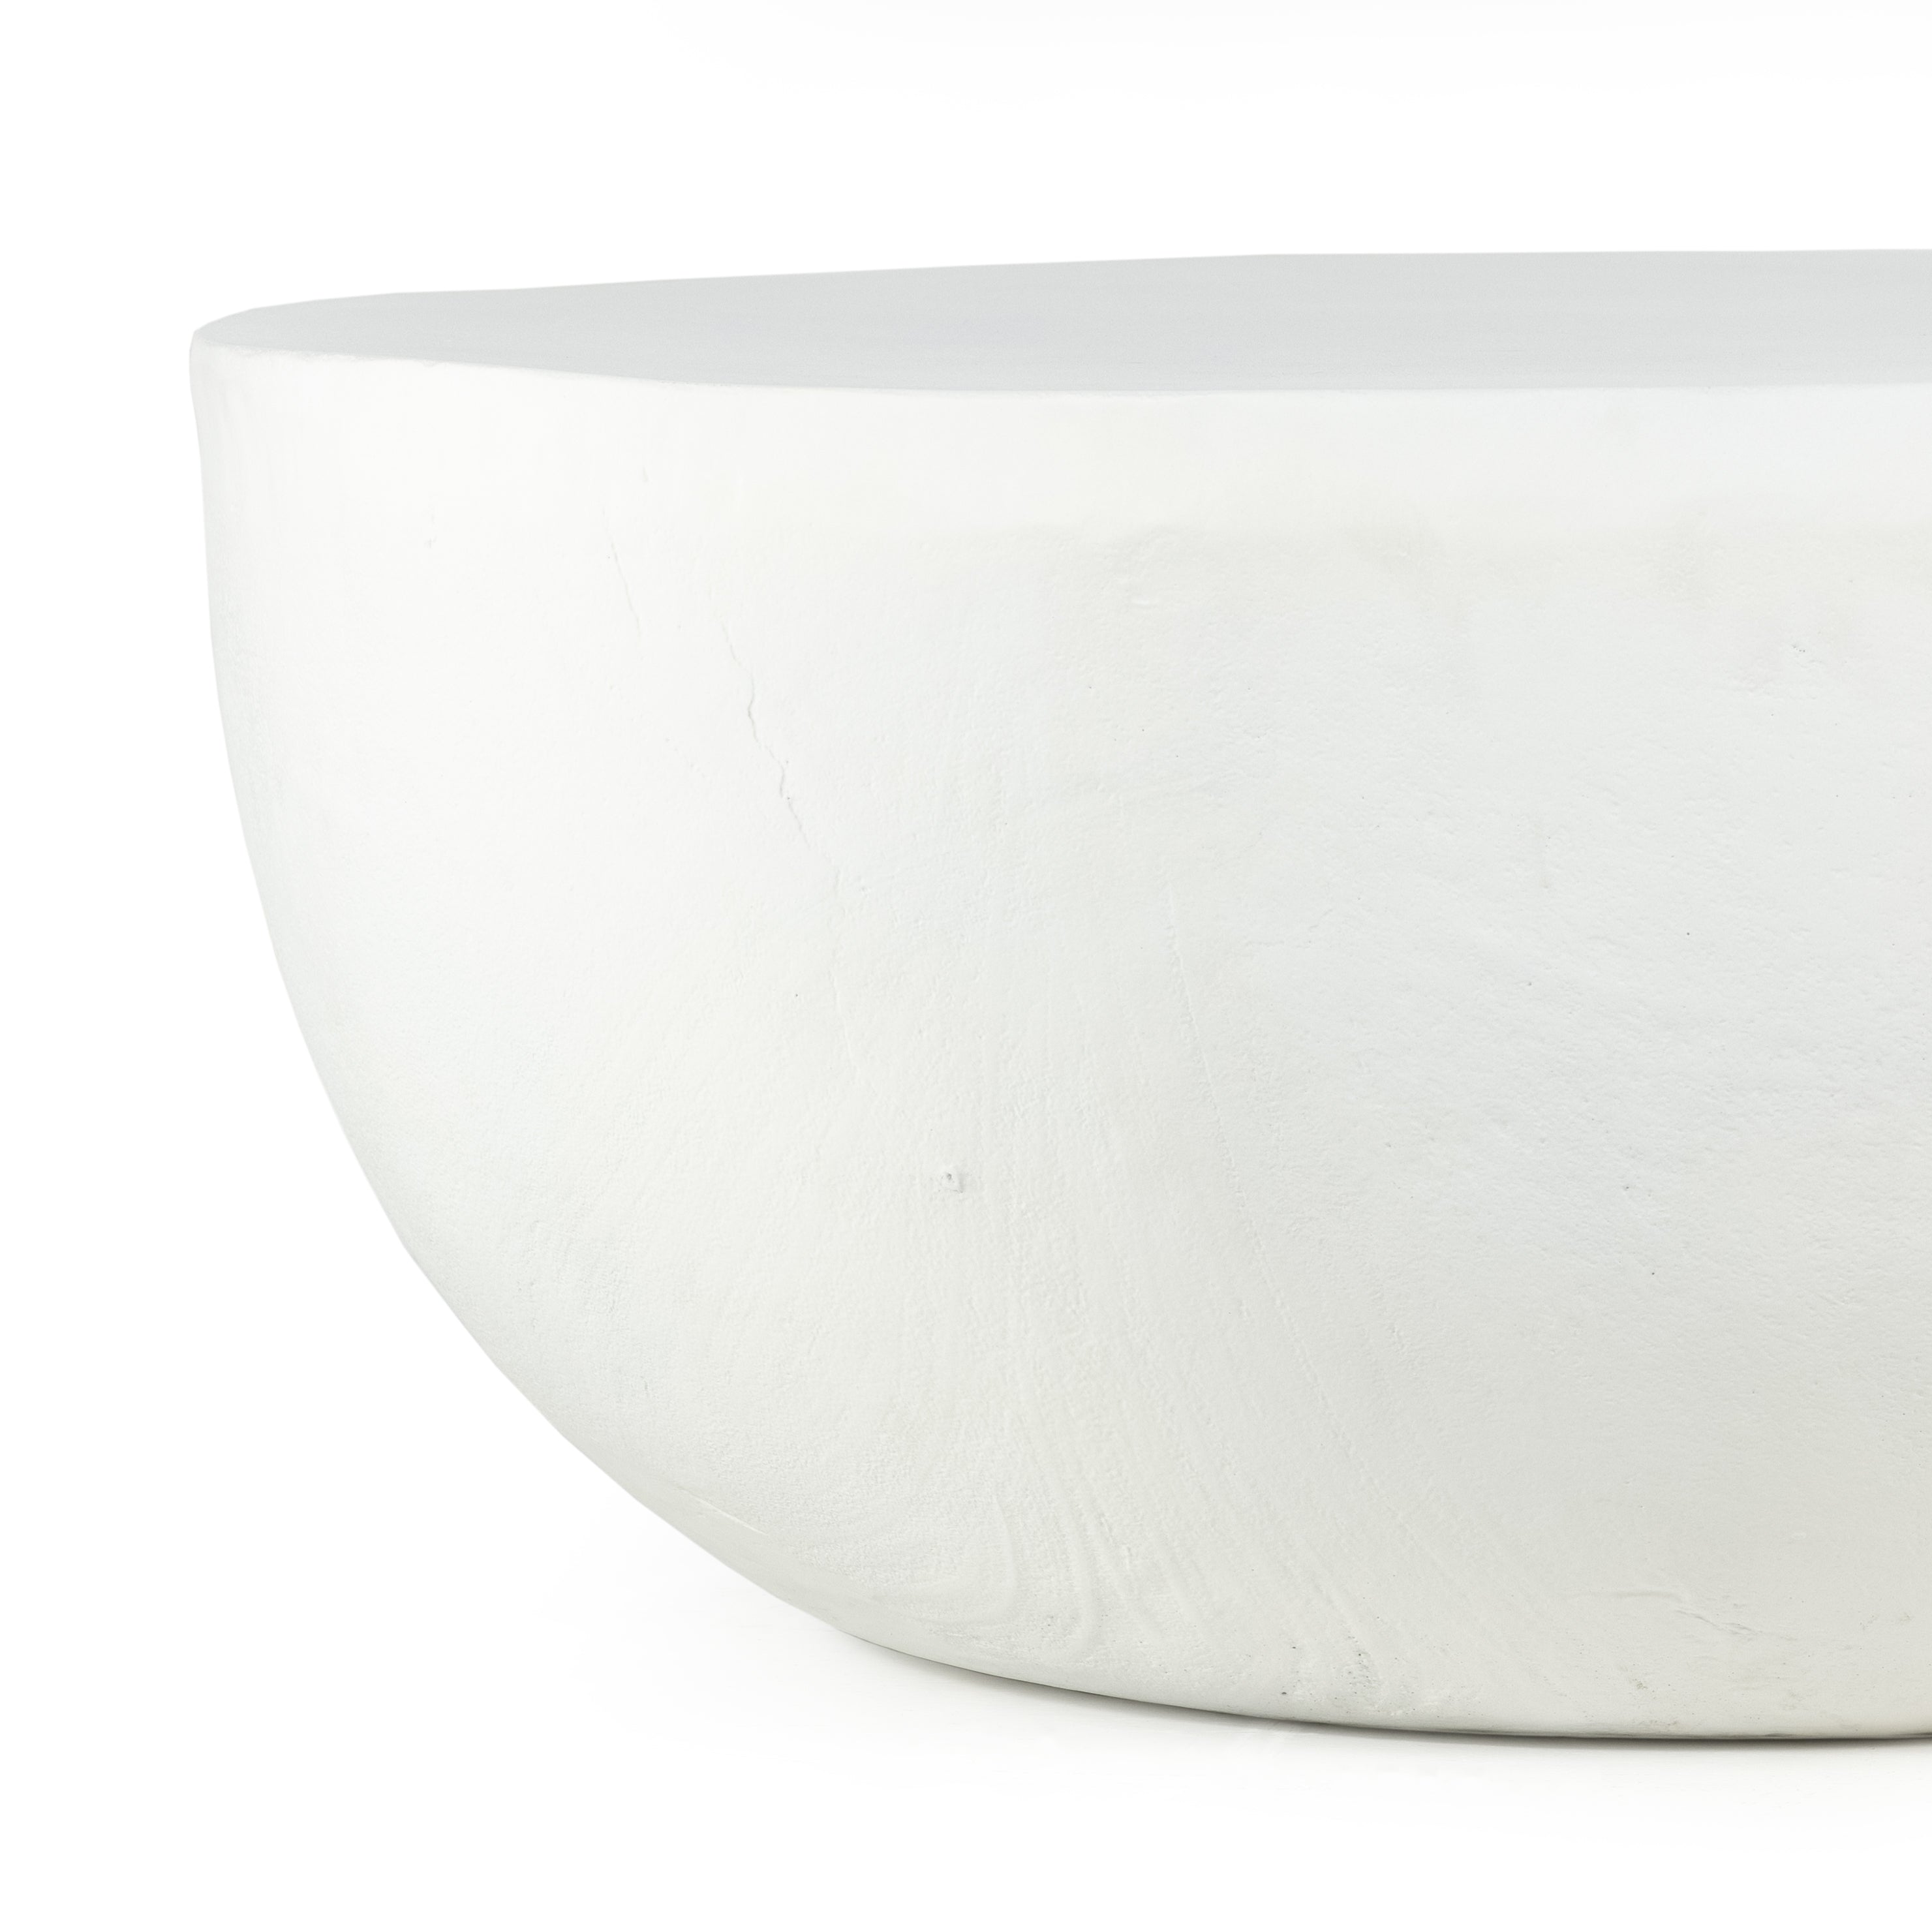 Our favorite Basil Coffee Table now comes in a gorgeous matte white finish. This brings a sleek, simple look to indoor or outdoor spaces.   Cover or store indoors during inclement weather and when not in use.  Overall Dimensions: 36.00"w x 36.00"d x 15.00"h